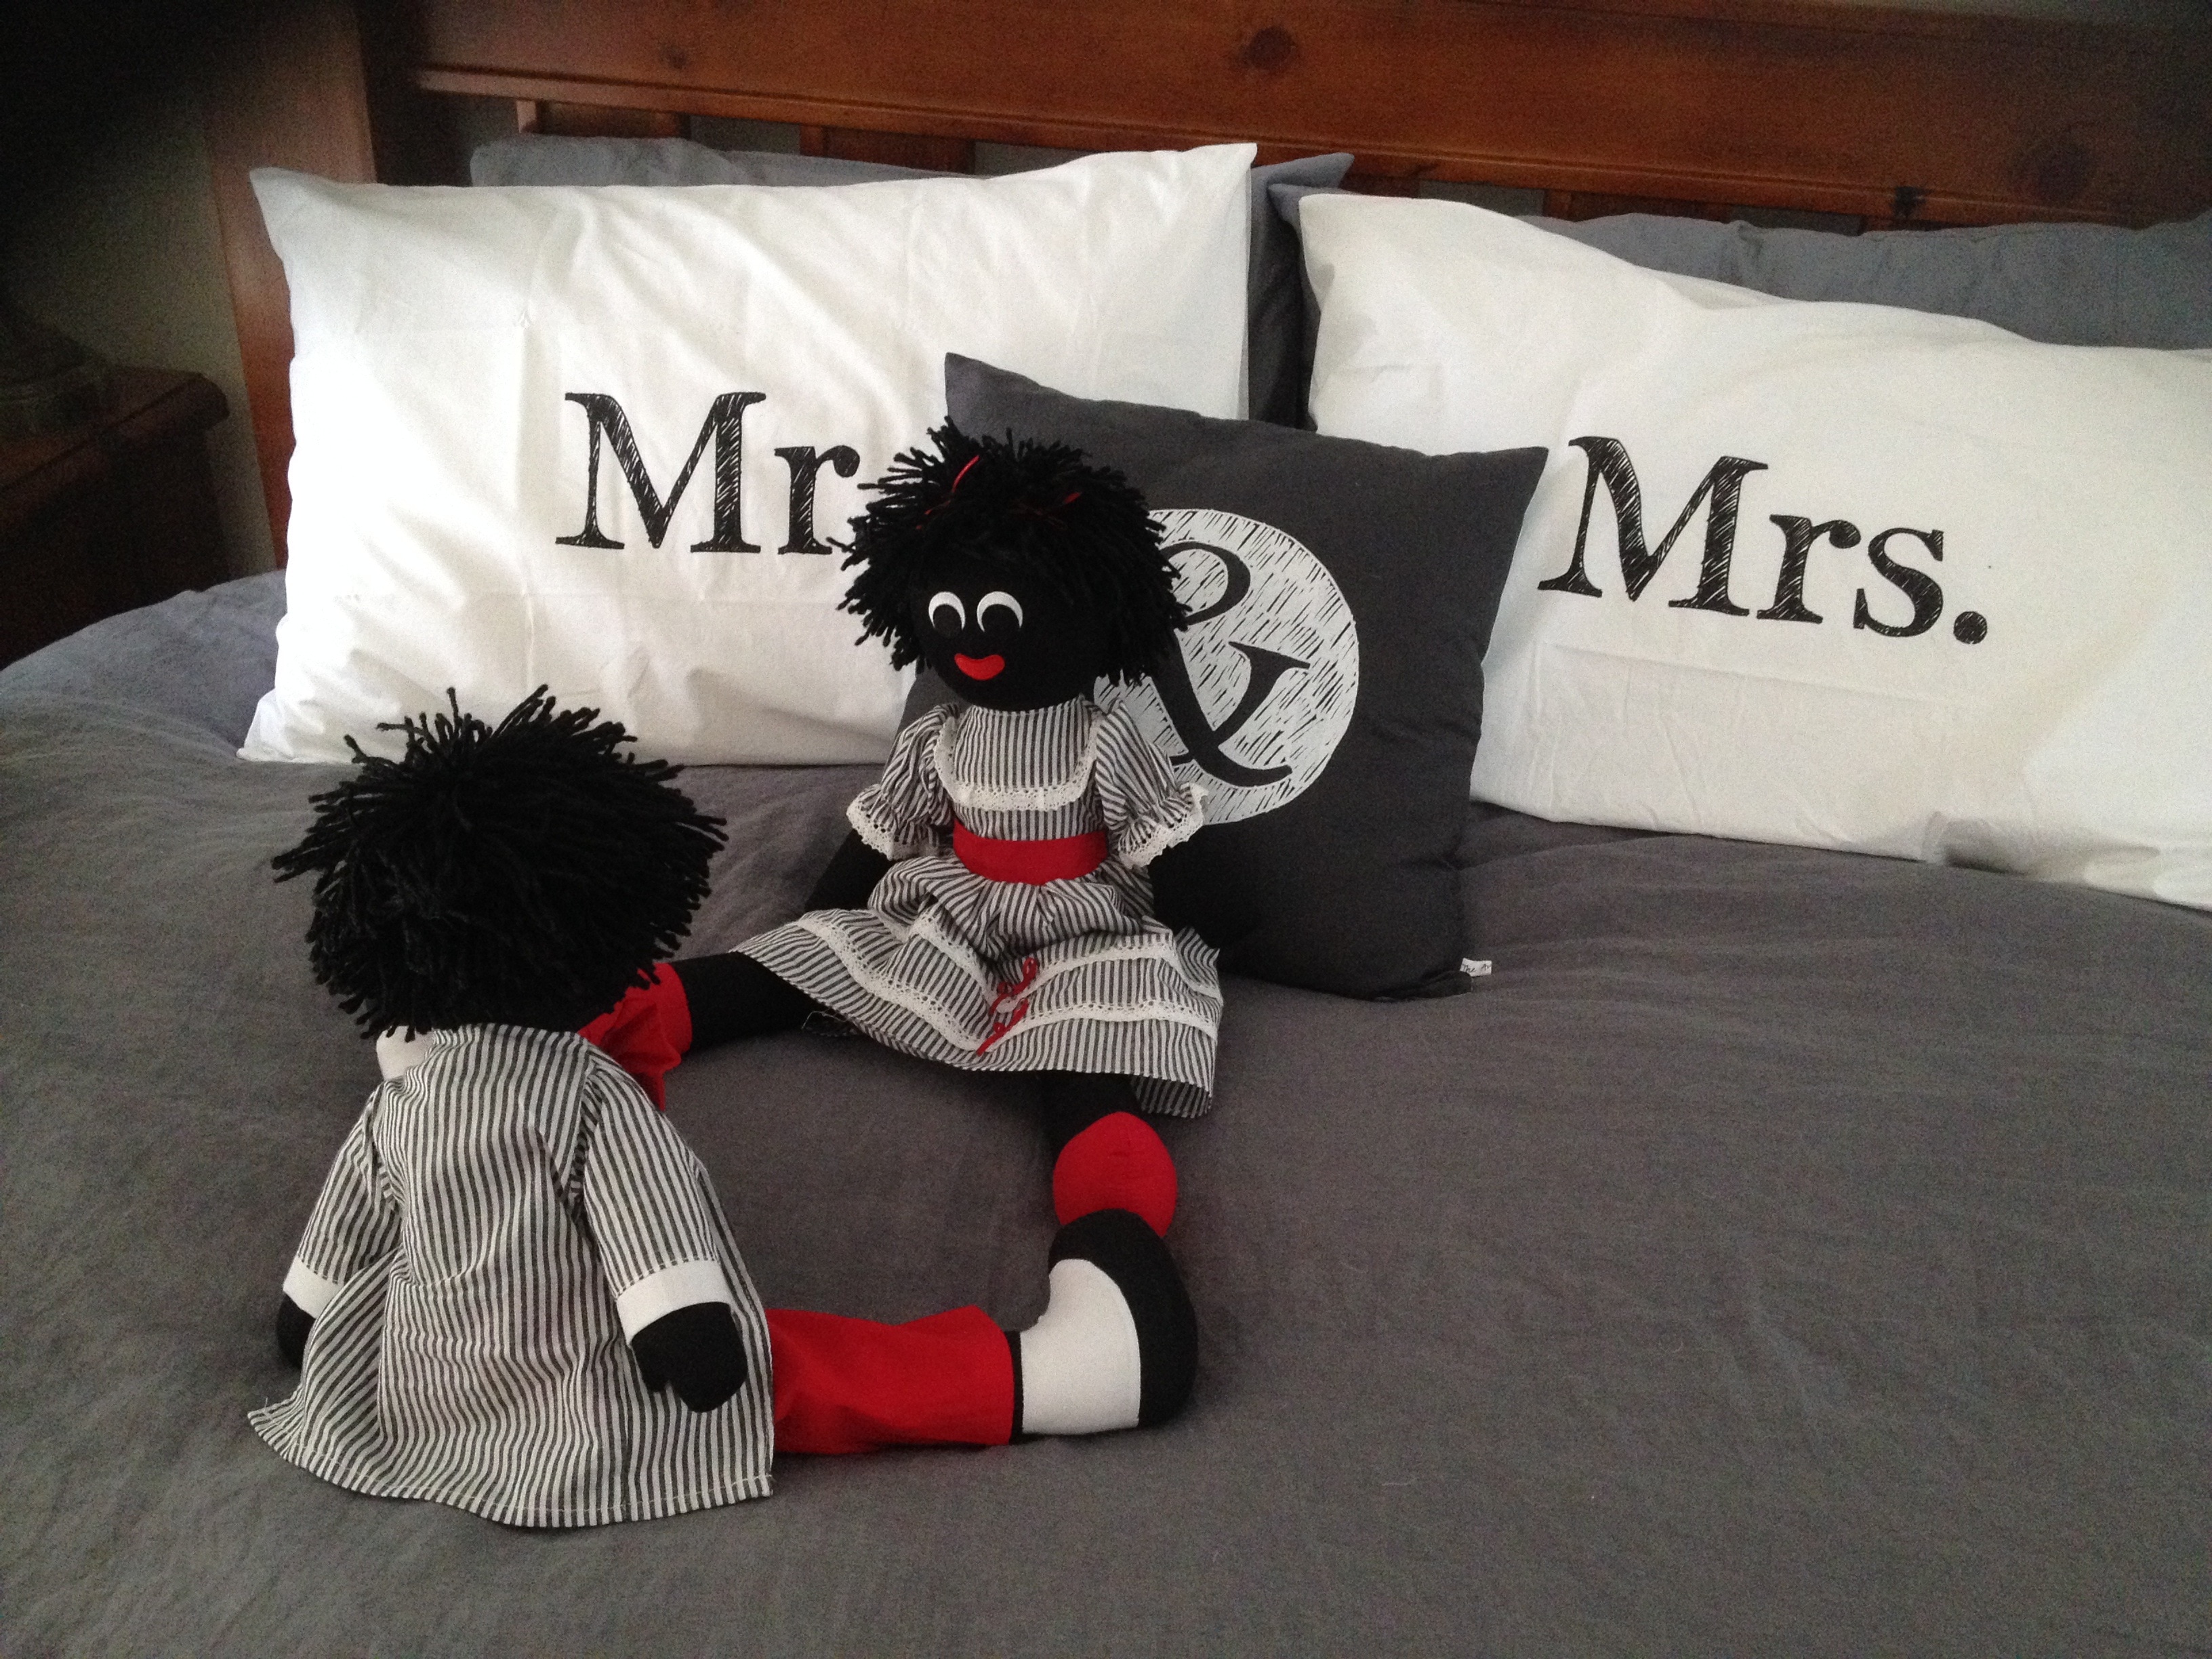 2 black and red plush toy and mr and mrs pillows